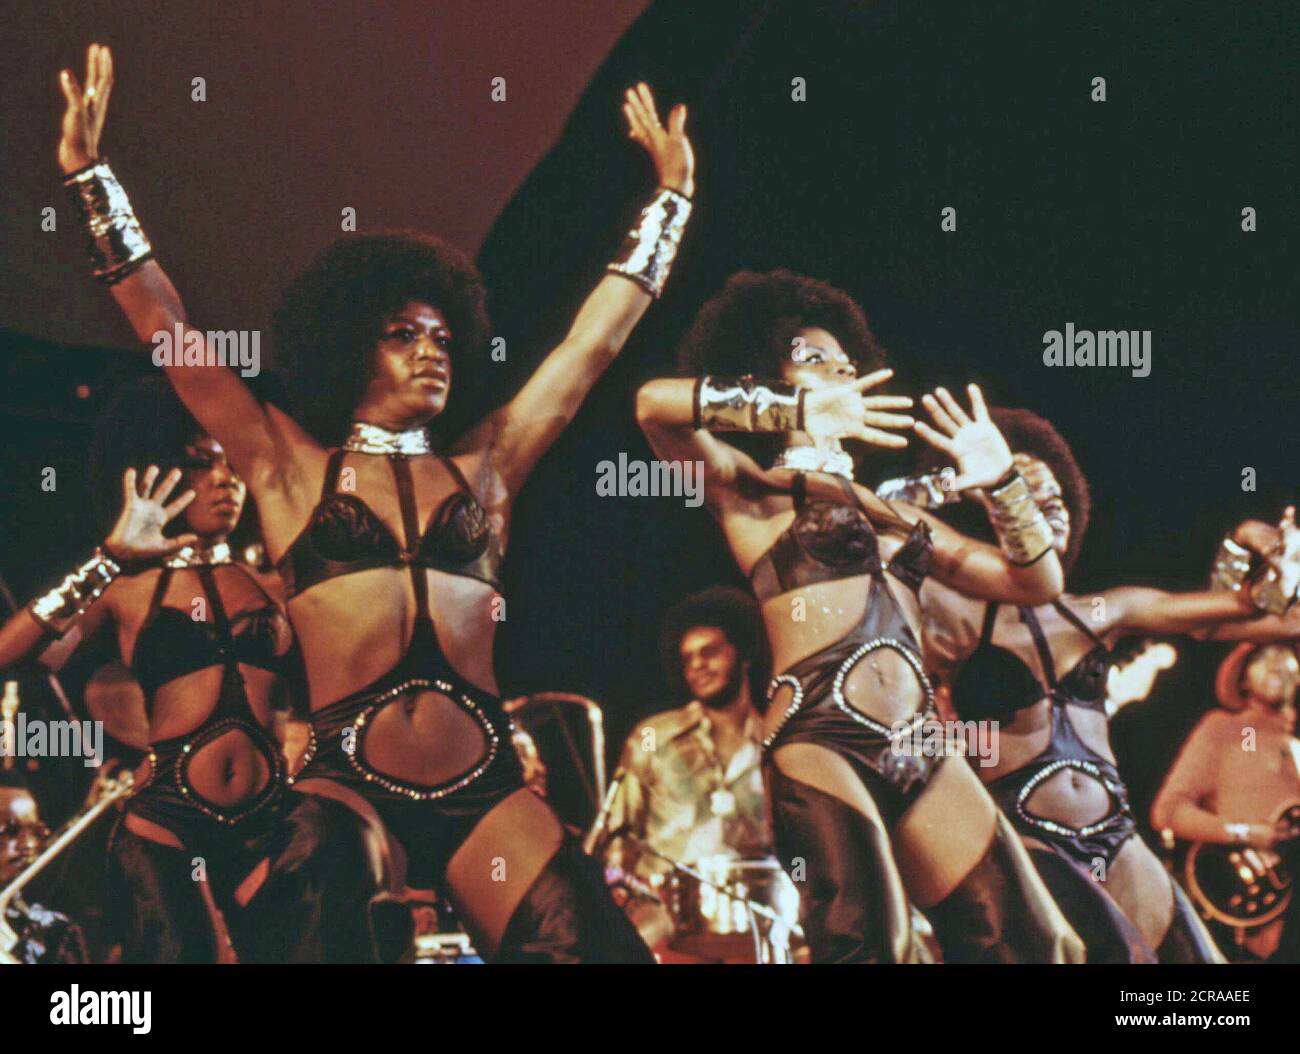 1973 - Isaac Hayes Dancers Perform At The International Amphitheater In Chicago, 10/1973 Stock Photo